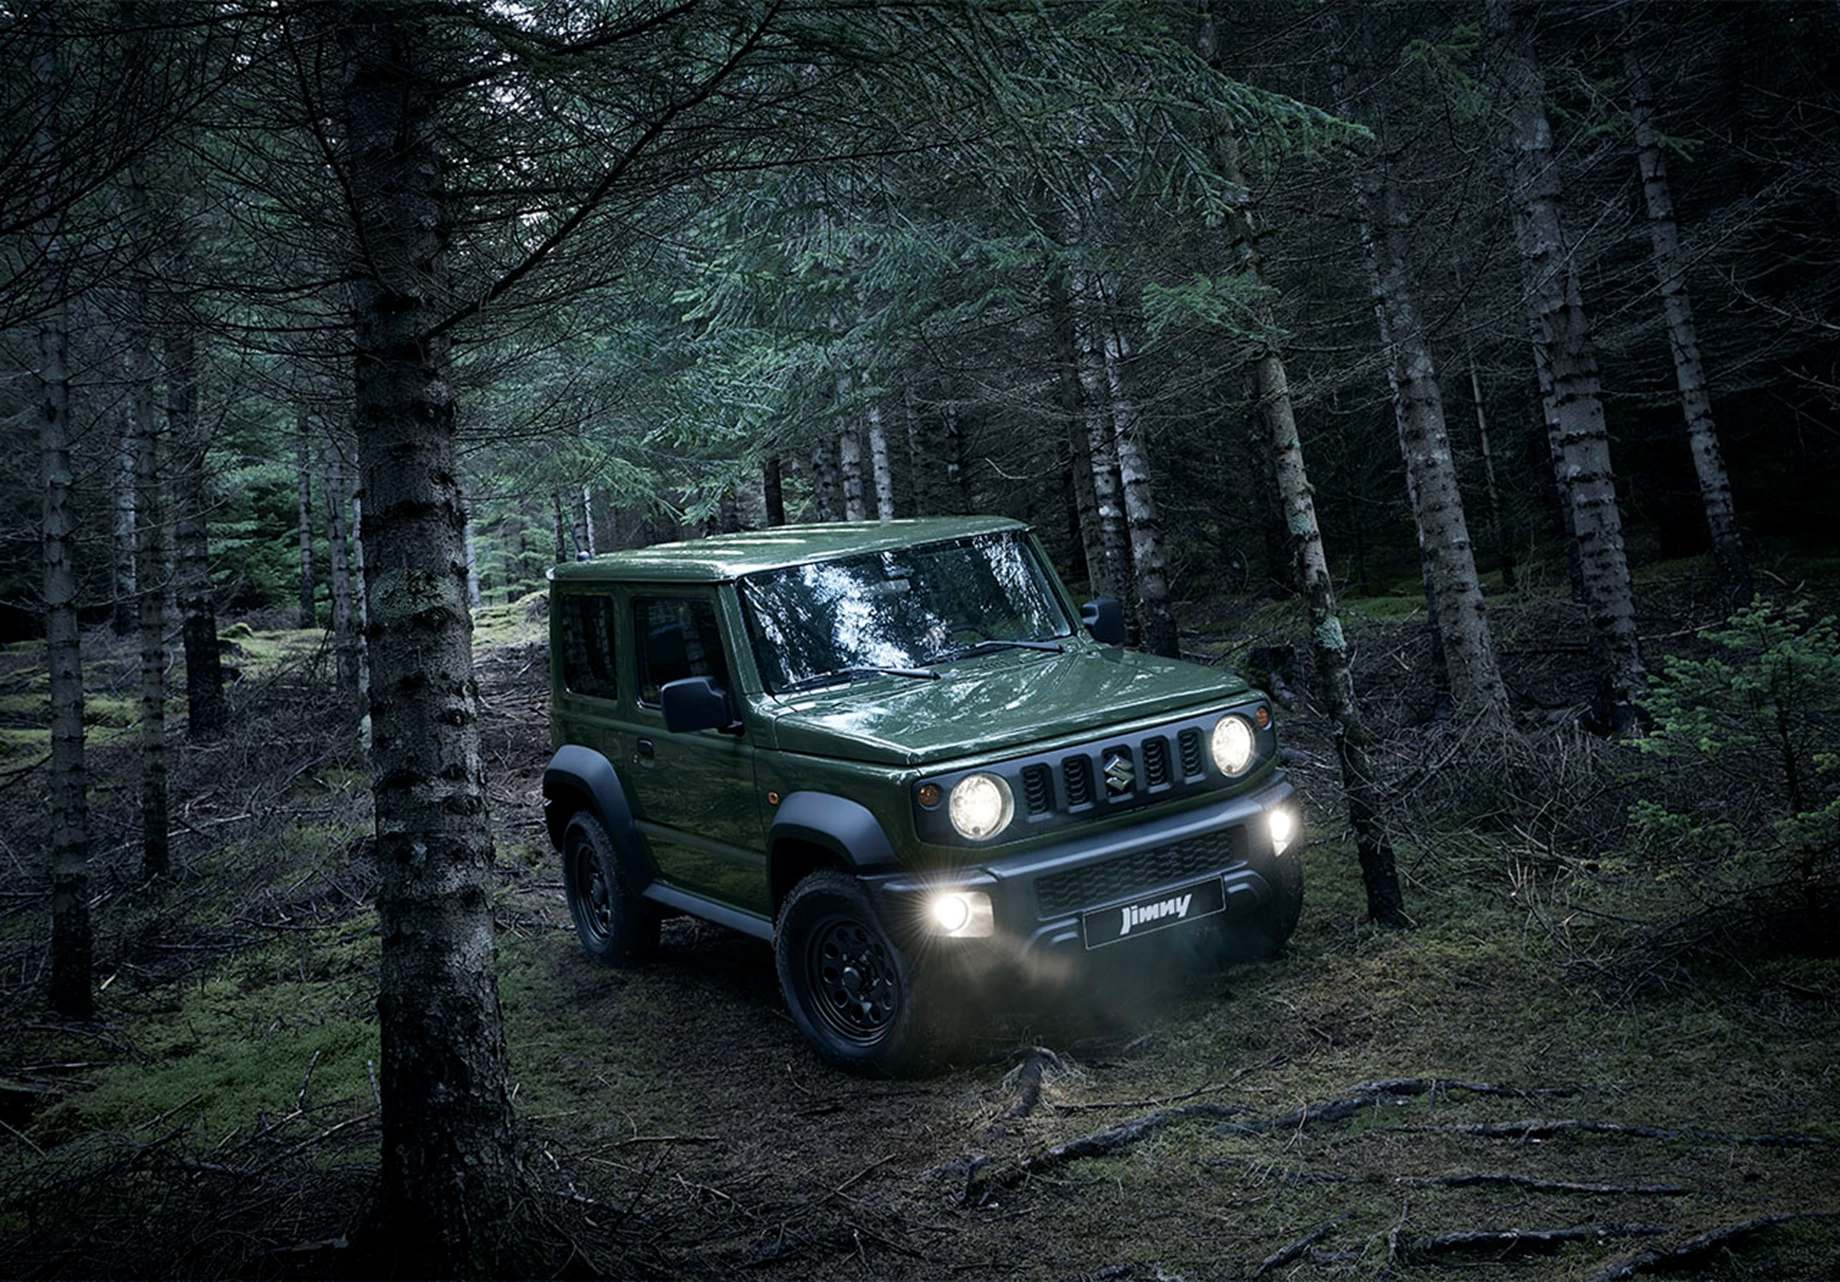 Suzuki Jimny Lite Debuts, Price And Features Dropped - All Details